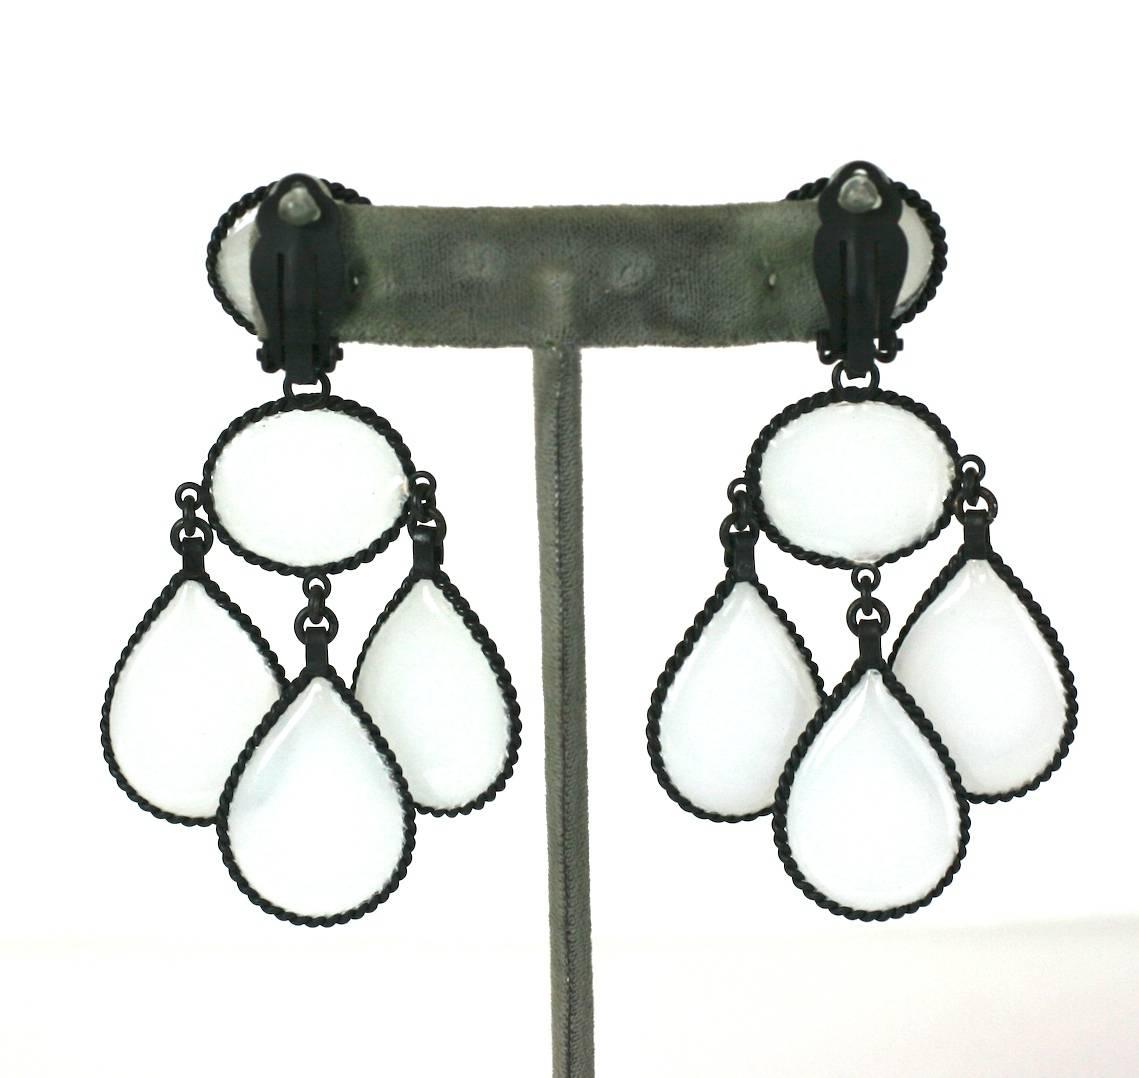 Large Opaline Girandole Earclips, hand made in the Parisian studios of Mark Walsh, Leslie Chin.
A modern twist on an antique configuration. Transluscent opaline poured glass pear form drops set in matte blackened twisted metal settings. Clip back